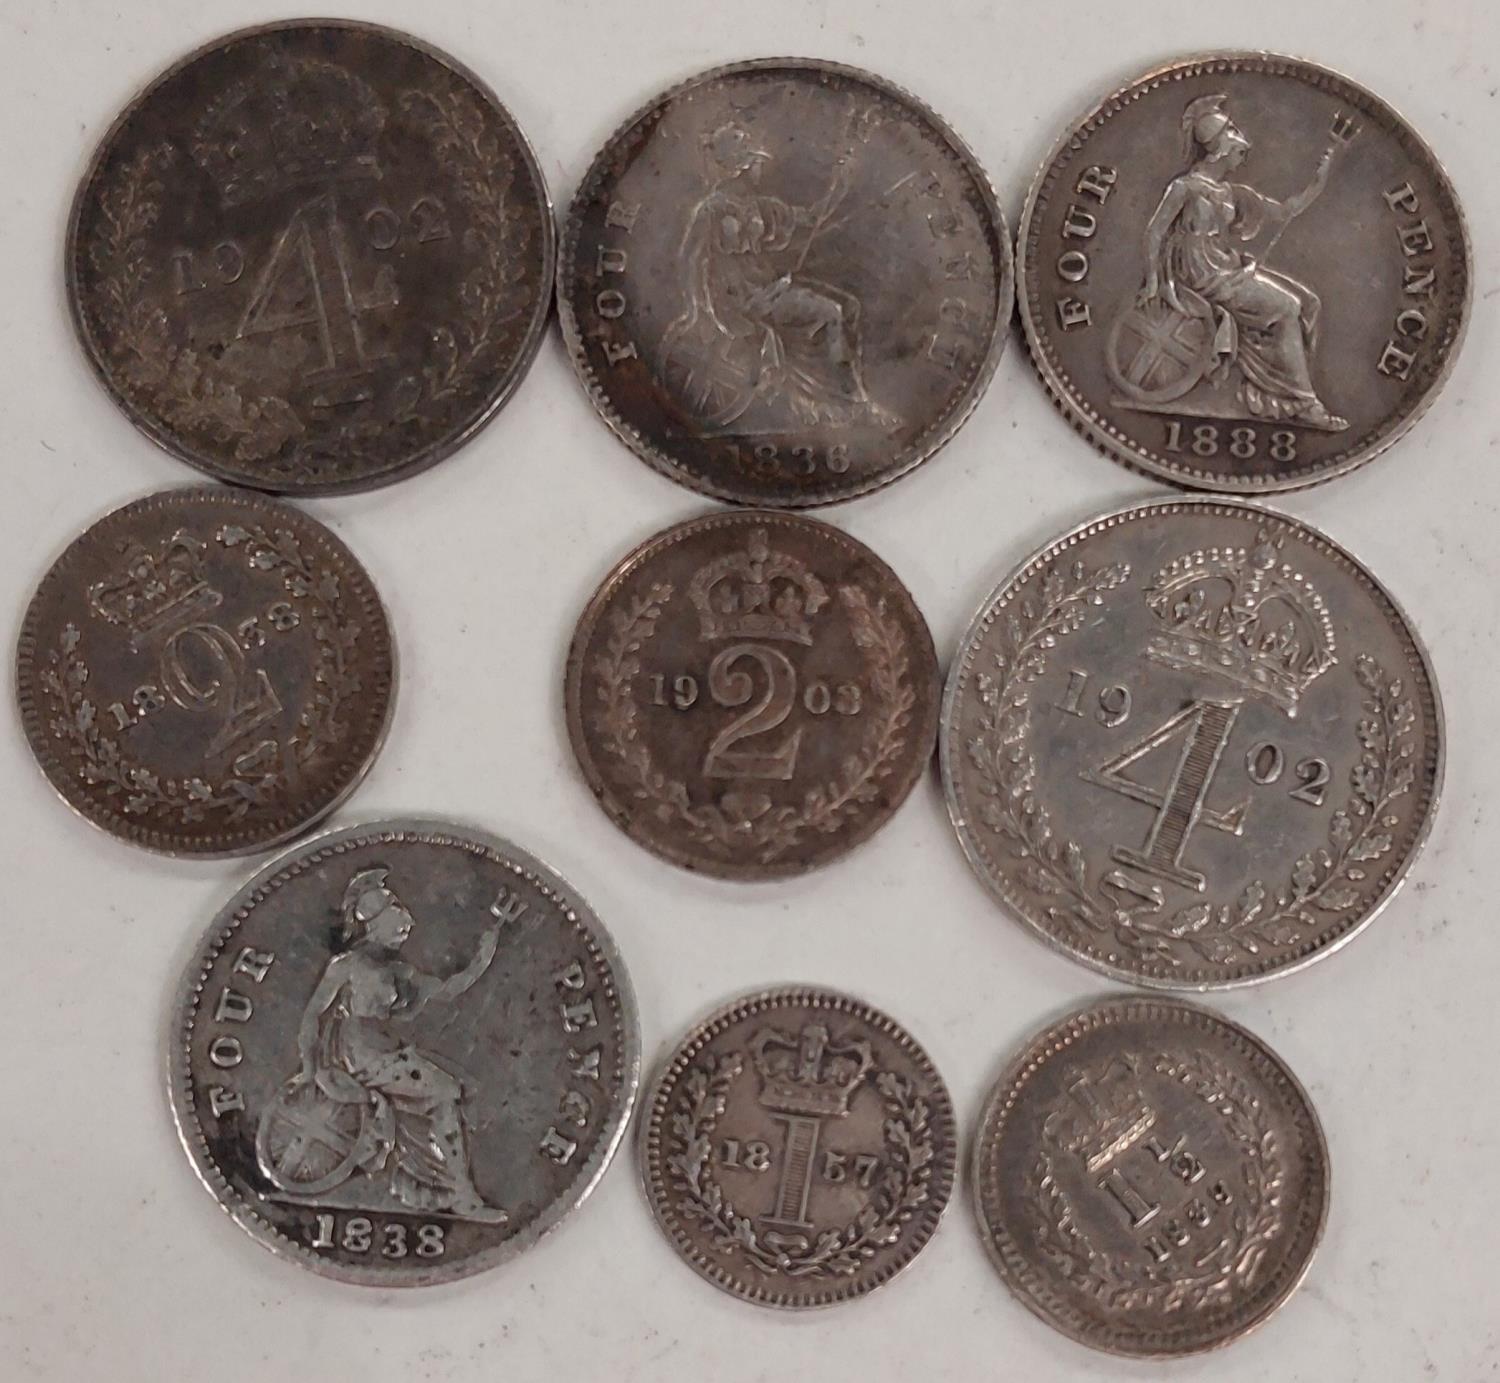 A selection of Maundy oddments and other minor silver coins, QV - EVII